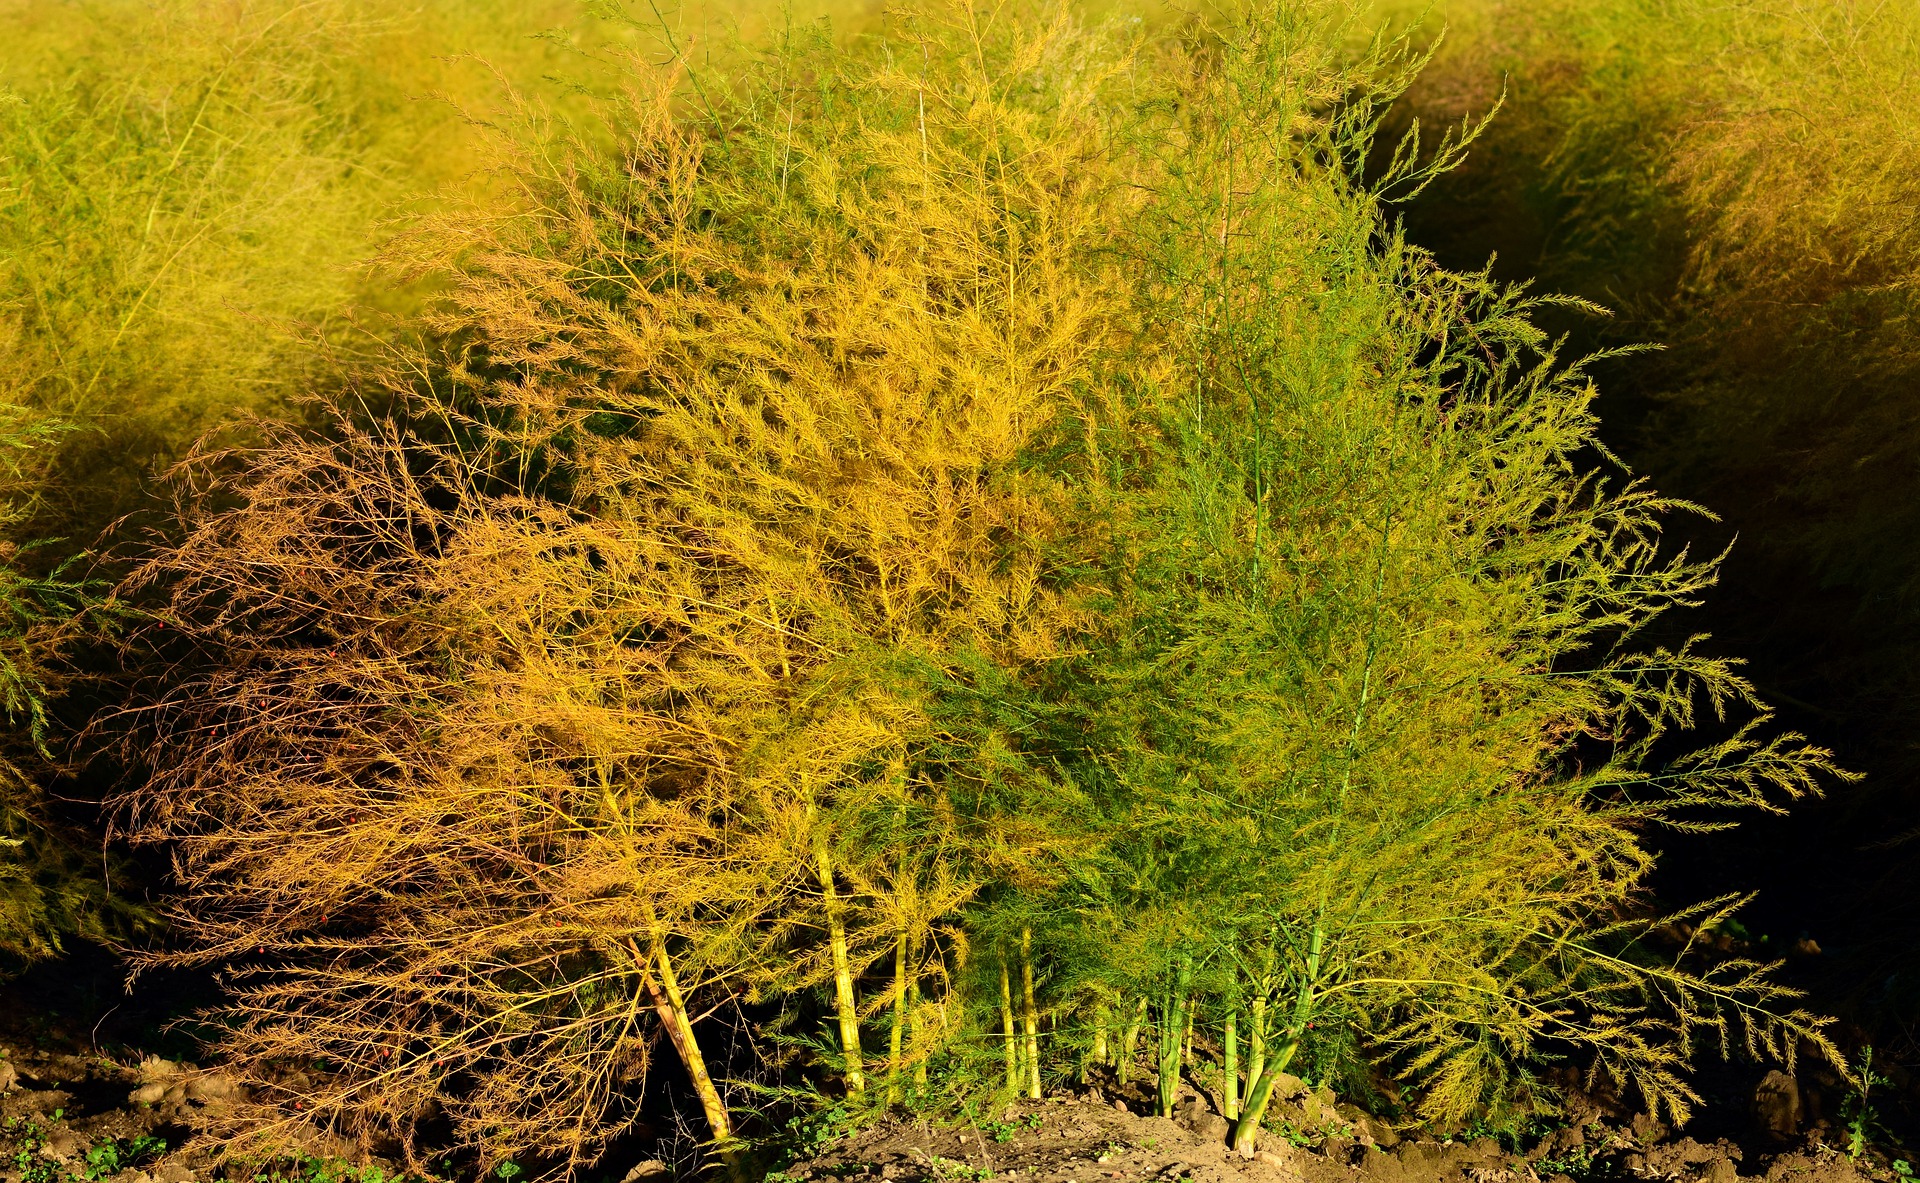 Image of mature asparagus foliage in late summer.